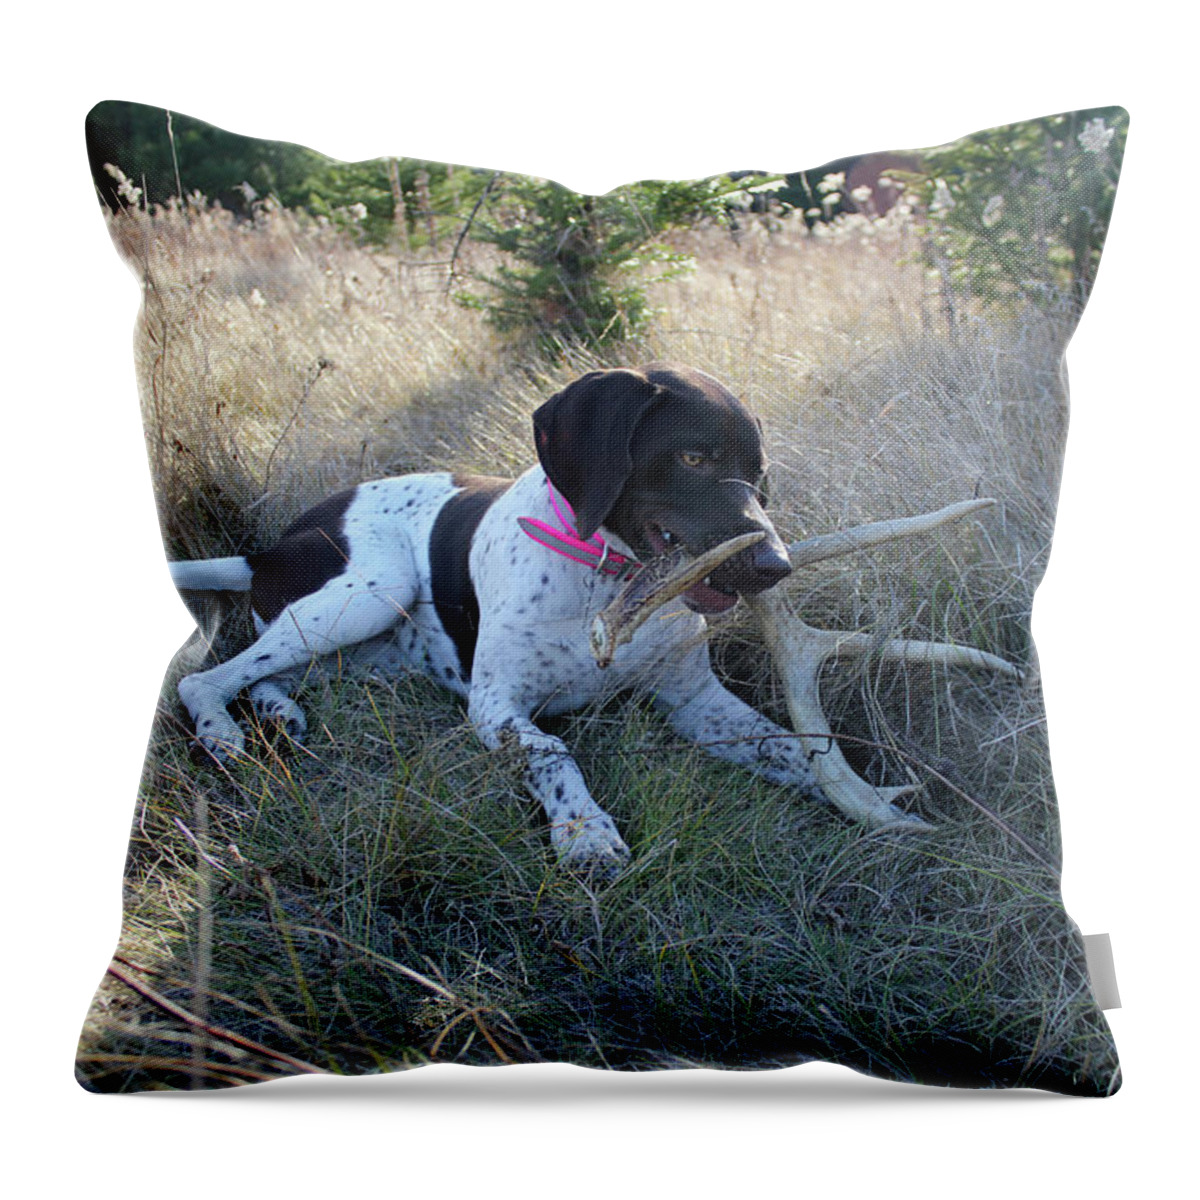 Gsp Throw Pillow featuring the photograph Seeking Shade by Brook Burling